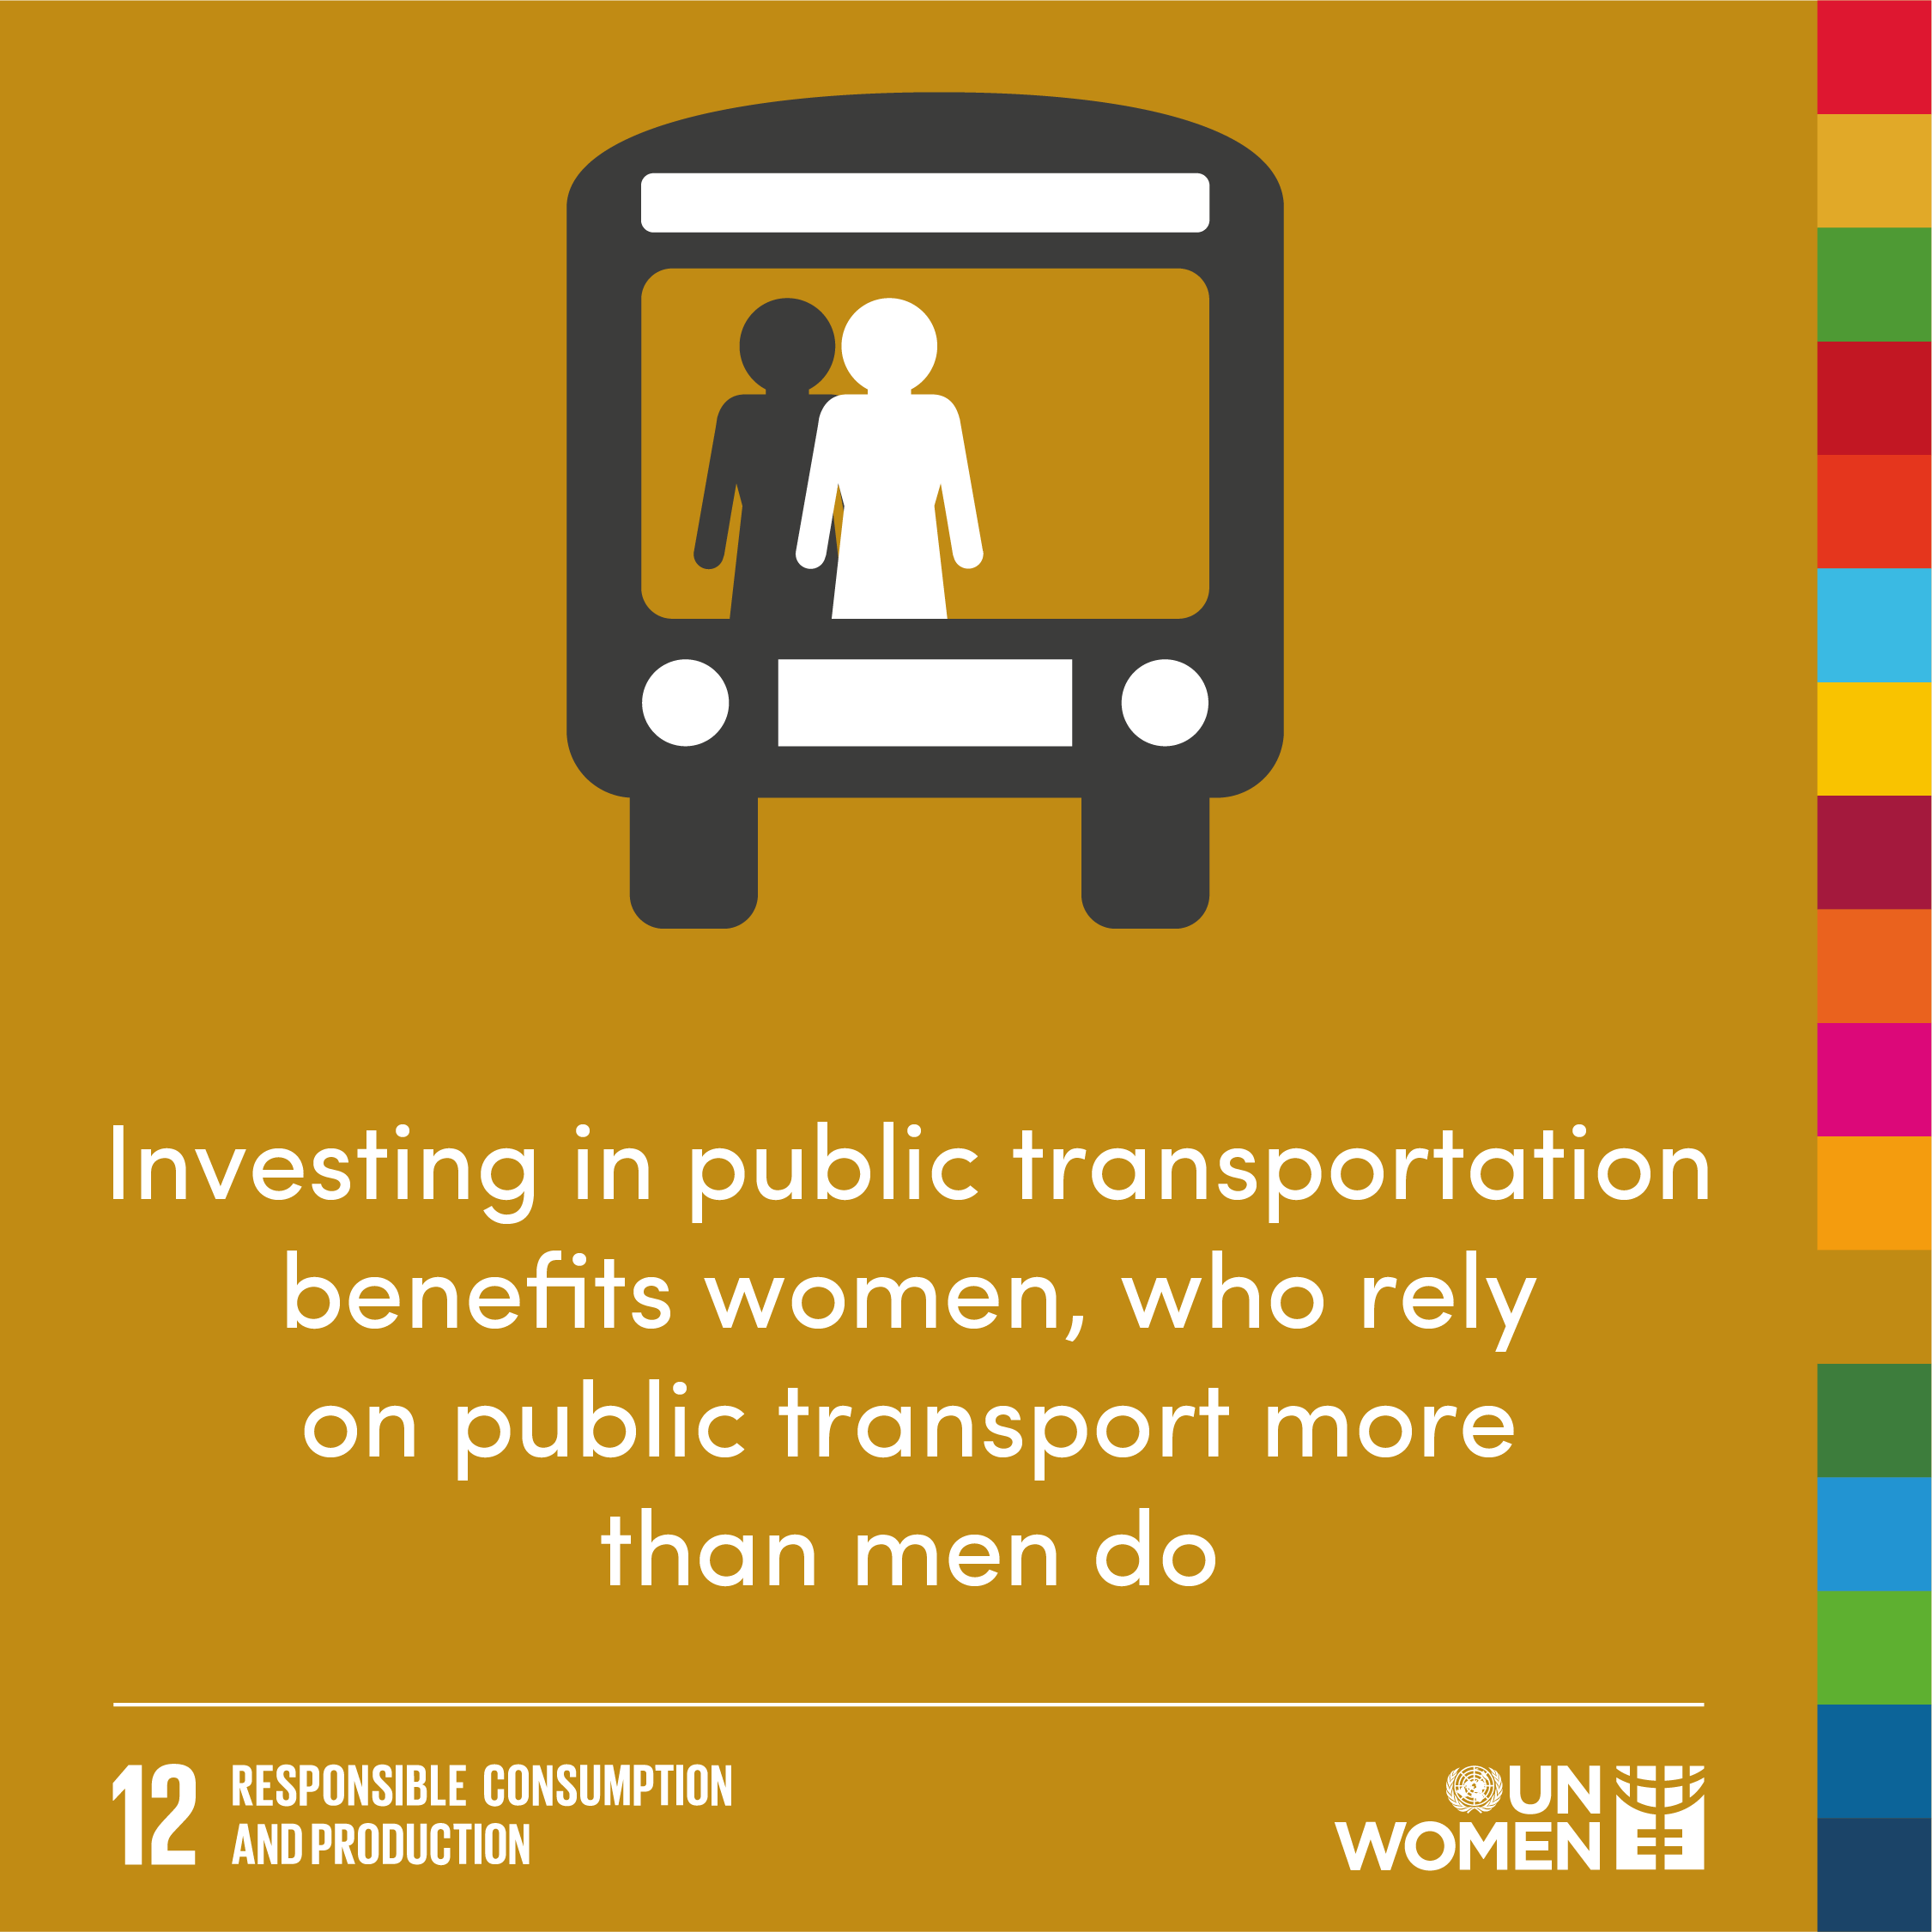 Investing in public transportation benefits women, who rely on public transport more than men do